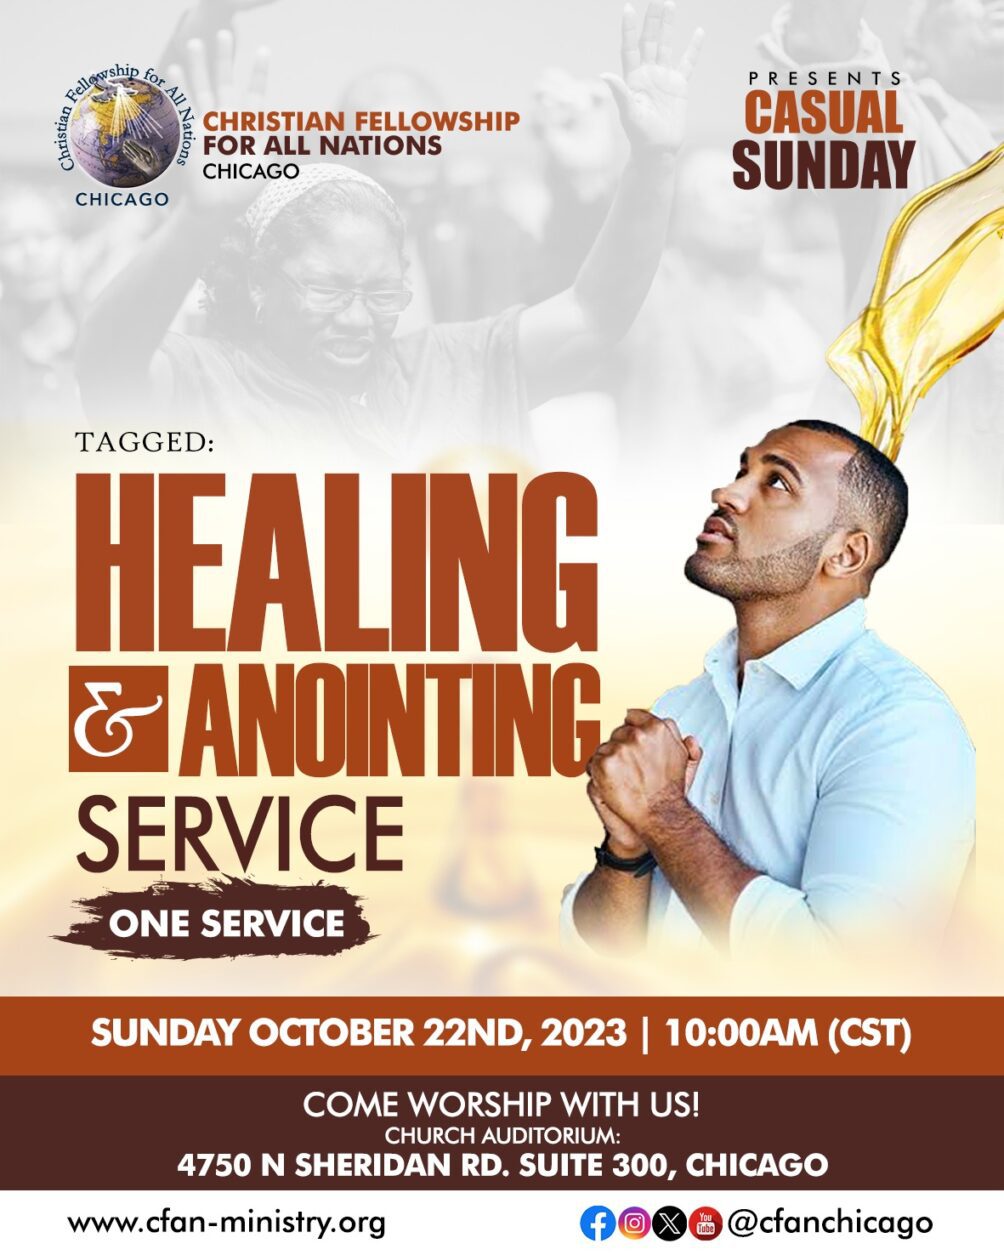 Casual Sunday - Healing and Anointing Service - One Service